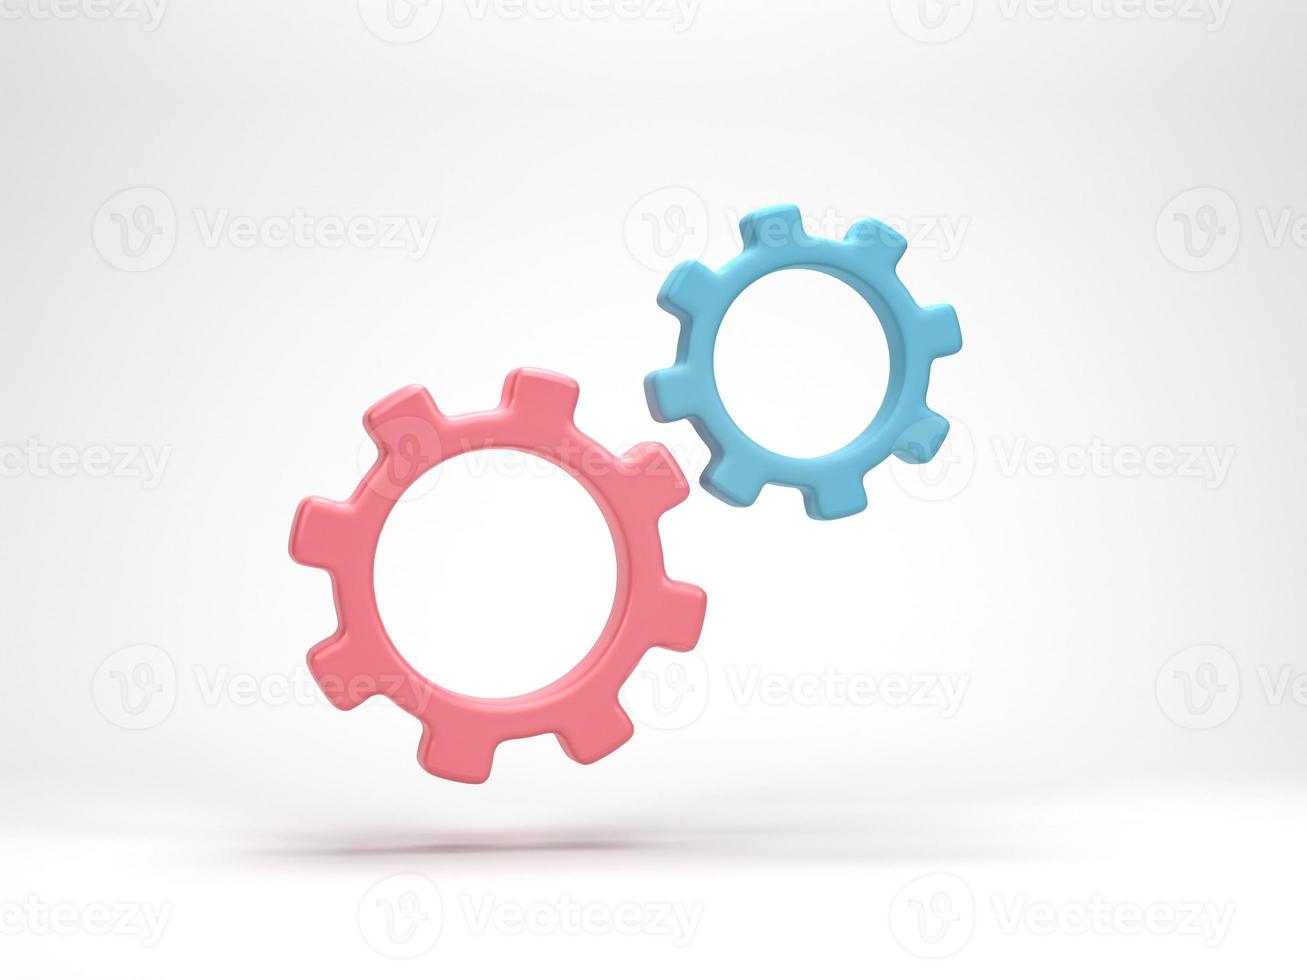 3D rendering, 3D illustration. Minimal gear symbol isolated on white background. Gear simple icon cogwheel concept. photo